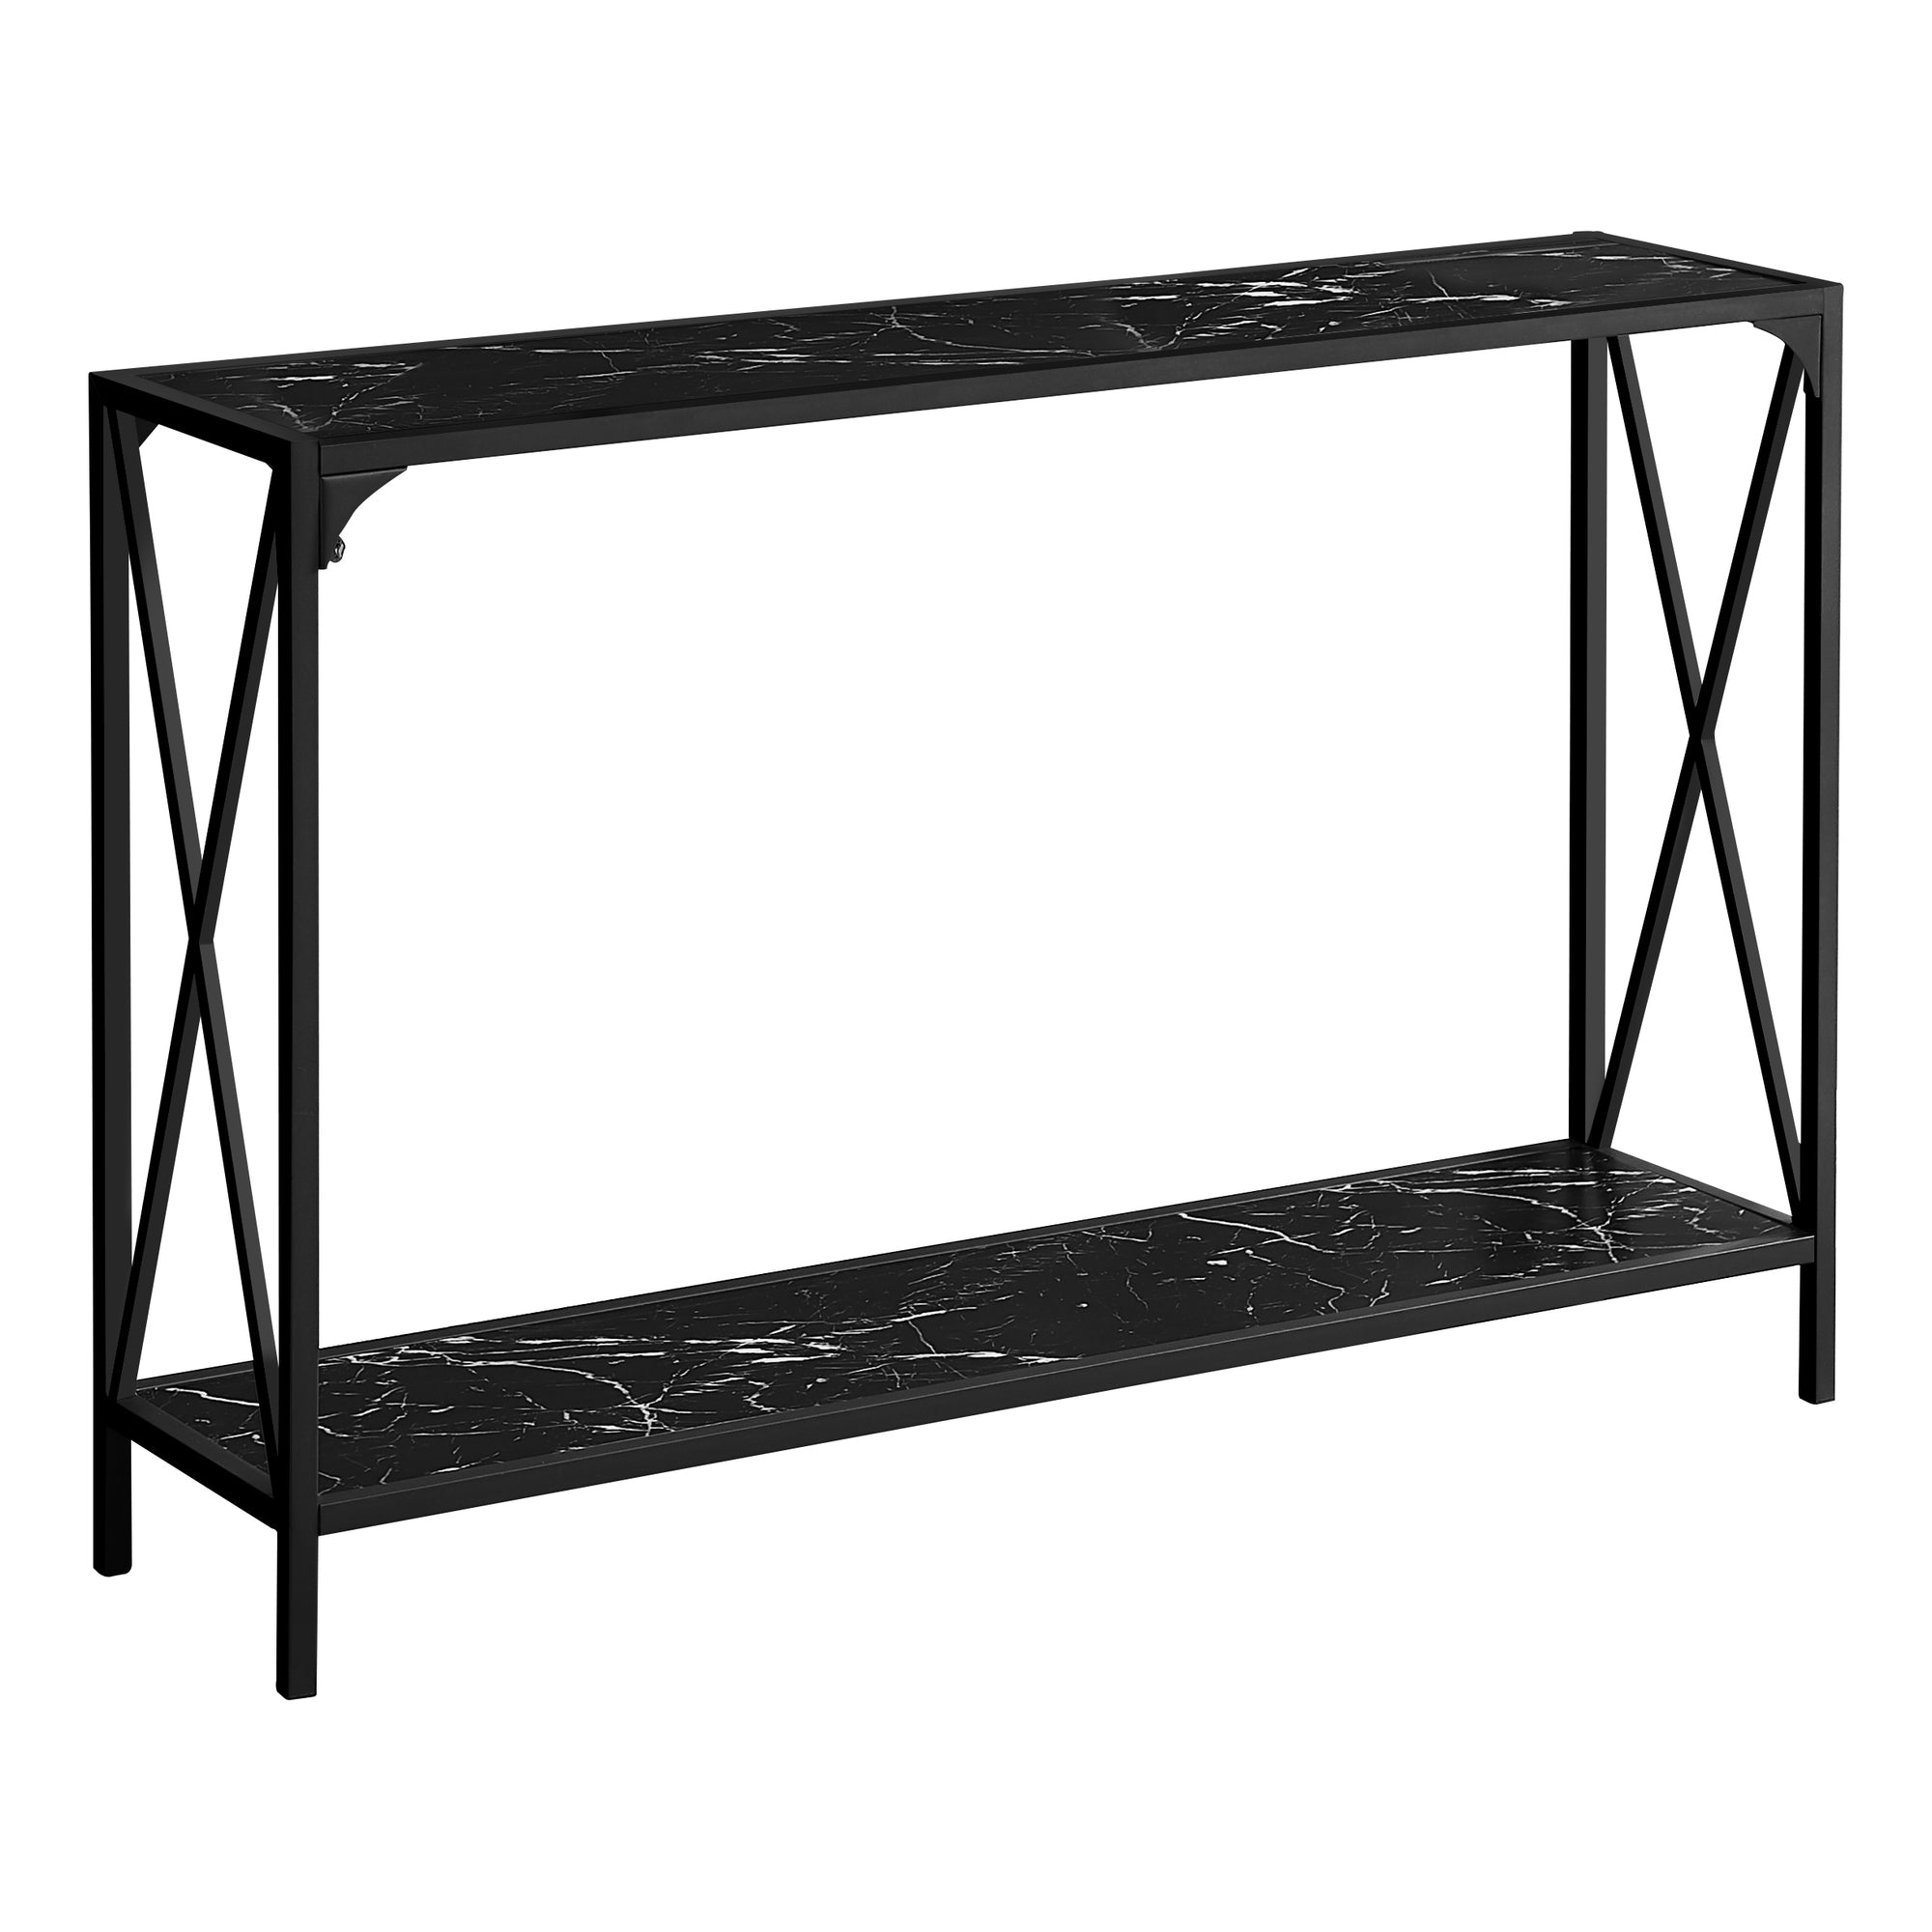 MN-142126    Accent Table, Console, Entryway, Narrow, Sofa, Living Room, Bedroom, Metal Frame, Laminate, Black Marble-Look, Contemporary, Glam, Modern